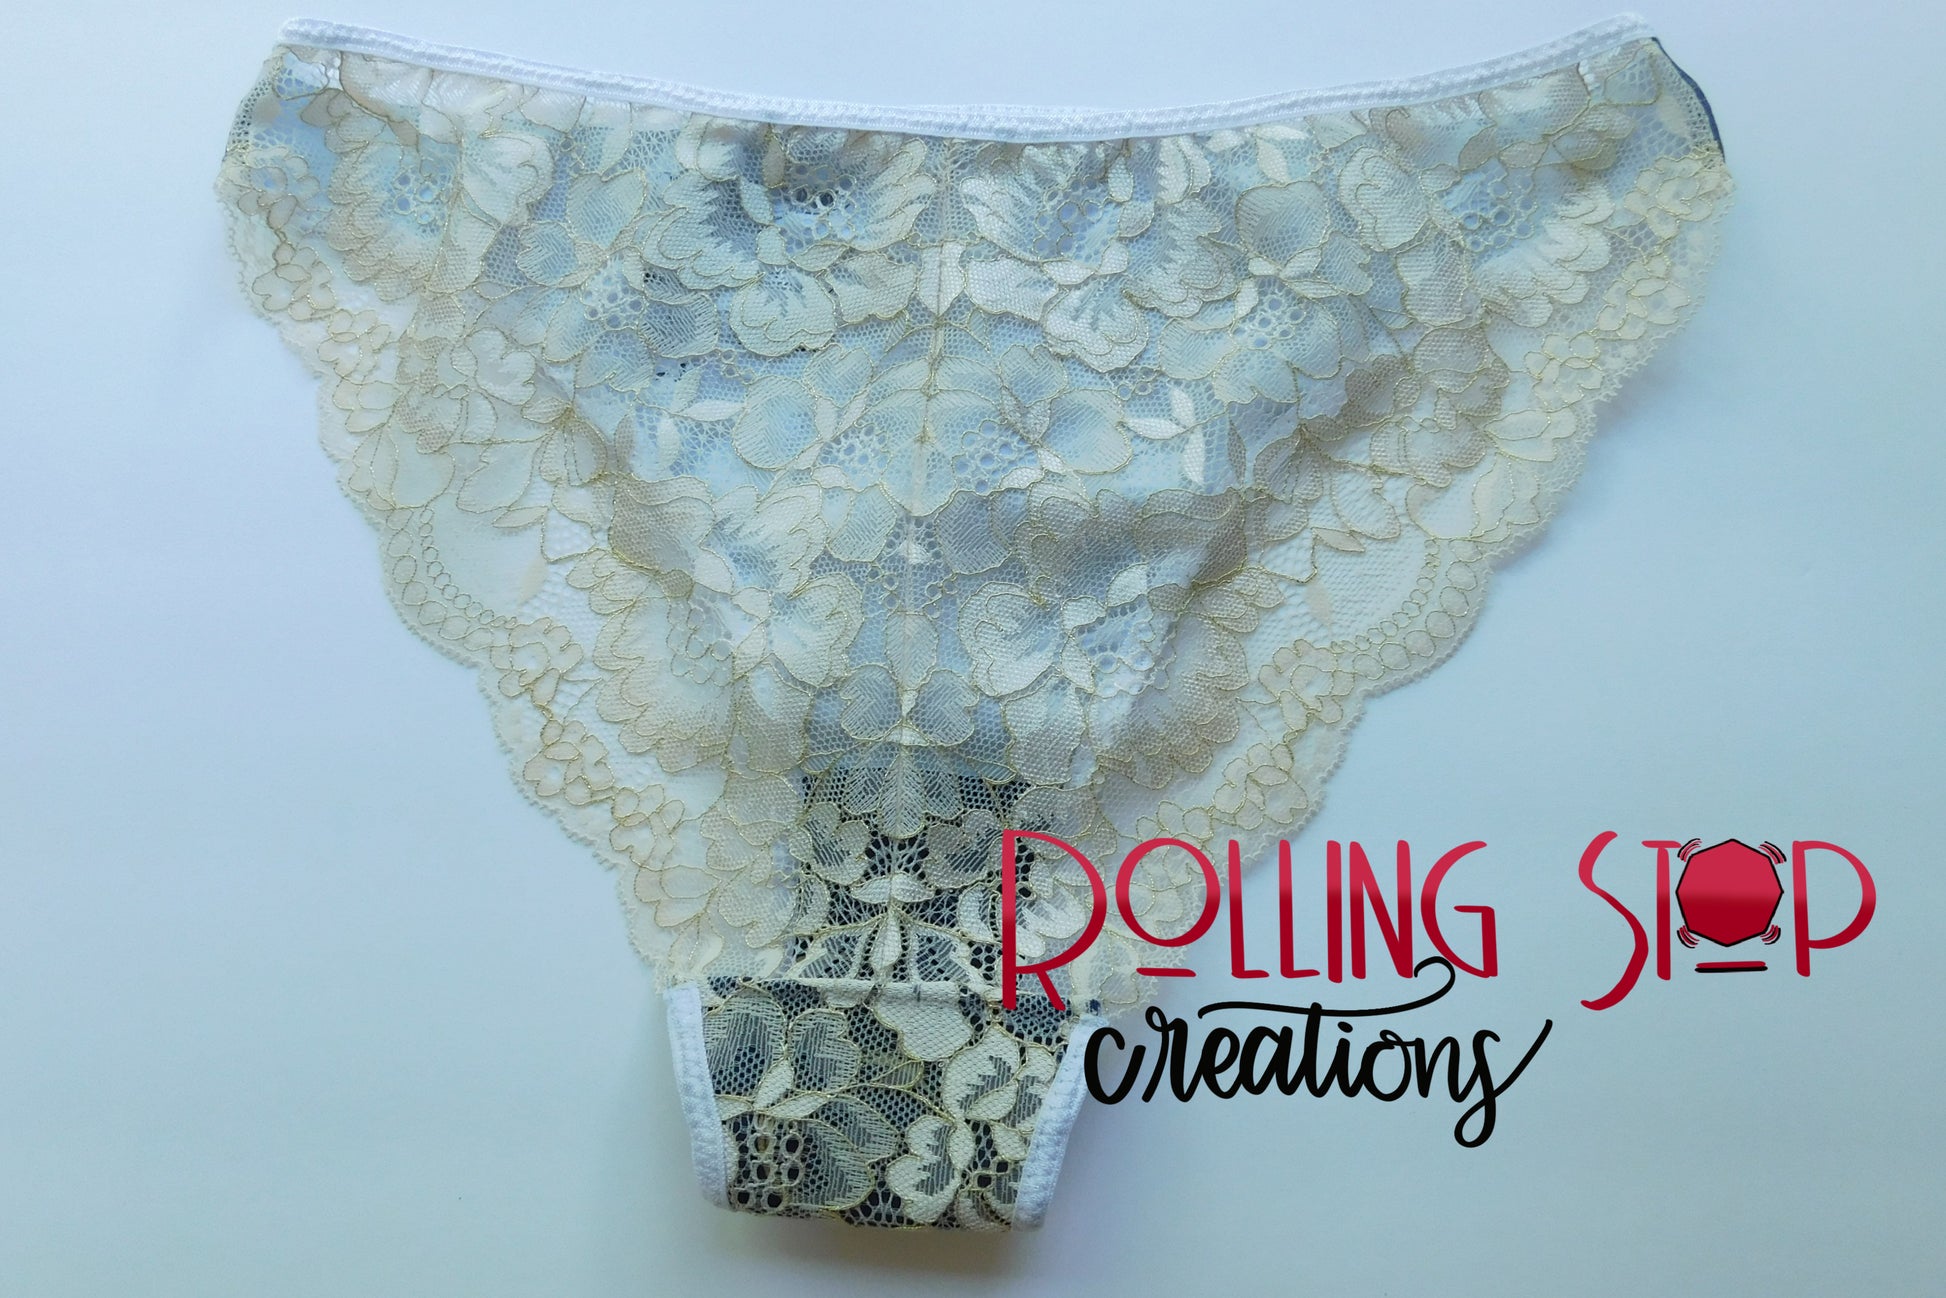 Golden Crescent Lace Accent Pantydrawls by Rolling Stop Creations sold by Rolling Stop Creations 